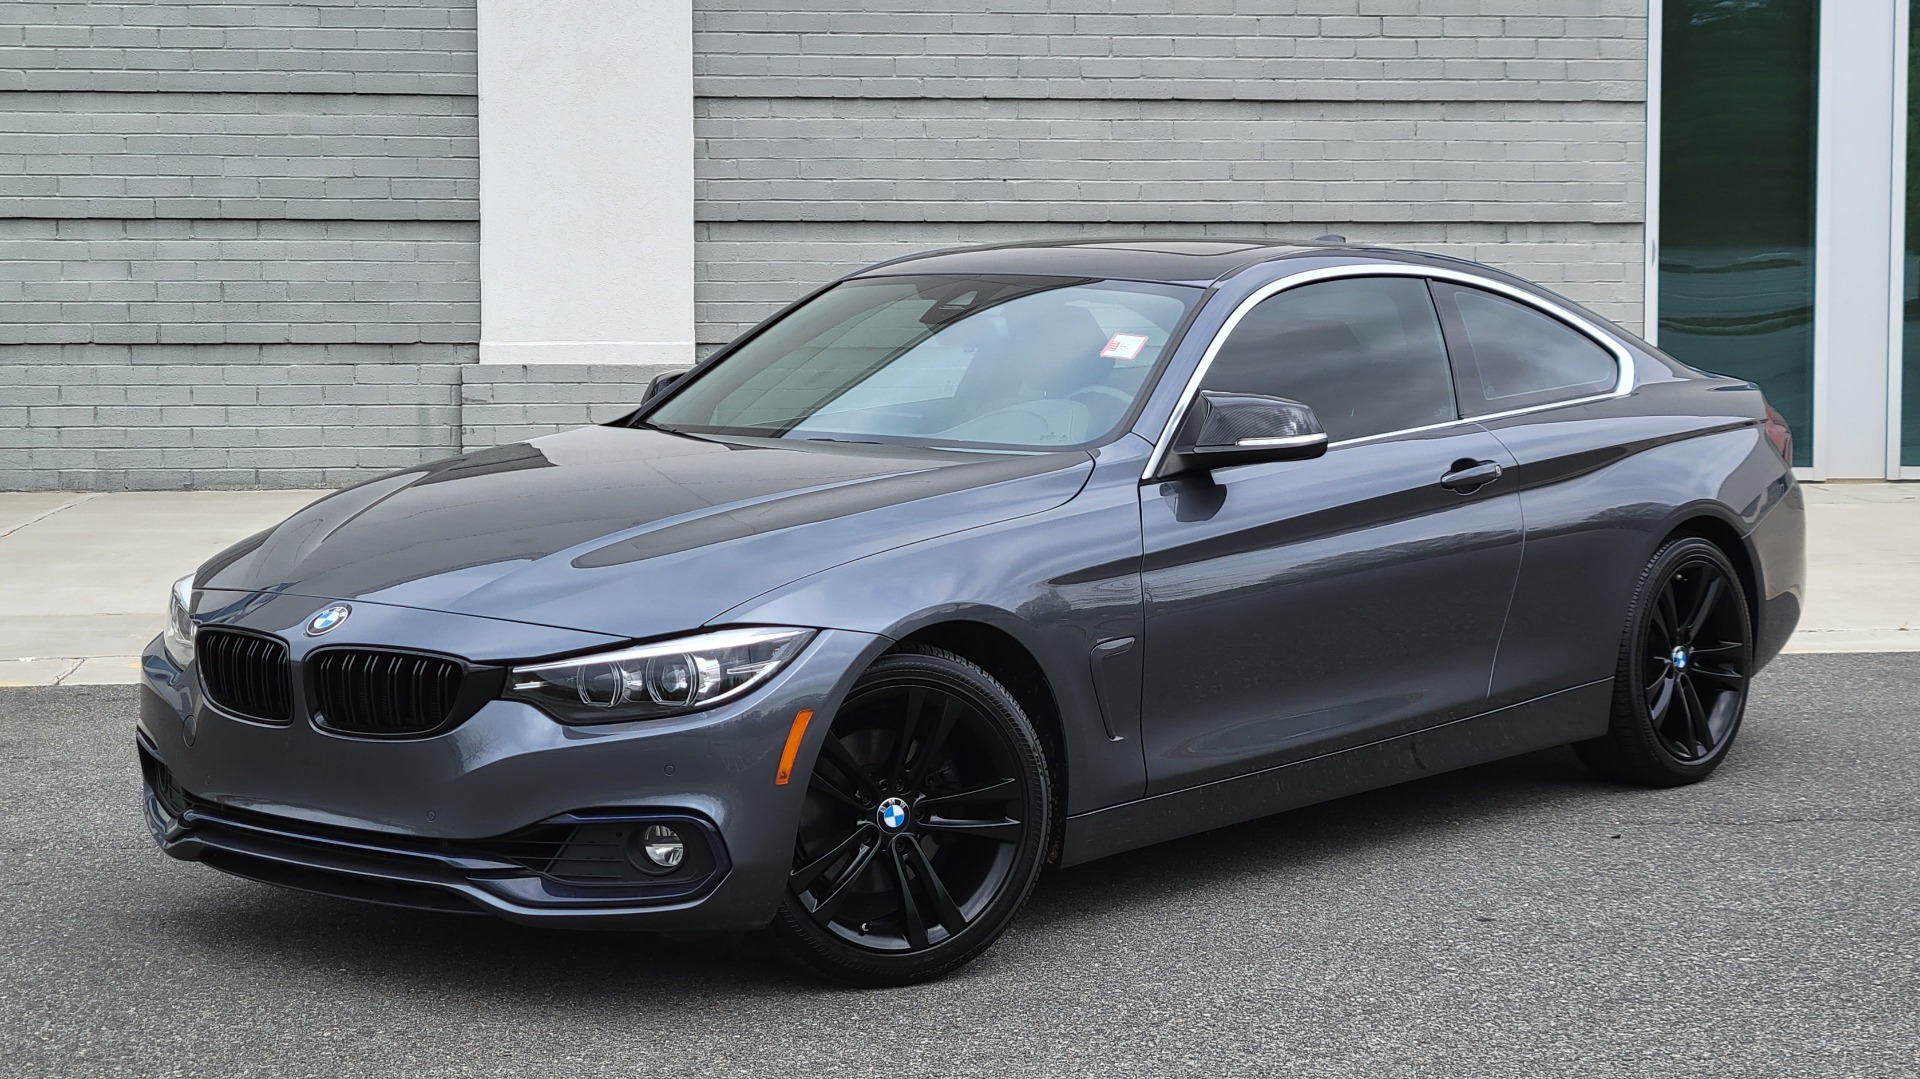 Used 2019 BMW 4 SERIES 430I COUPE 2.0L / RWD / DRVR ASST / CONV PKG / SUNROOF / REARVIEW for sale Sold at Formula Imports in Charlotte NC 28227 10